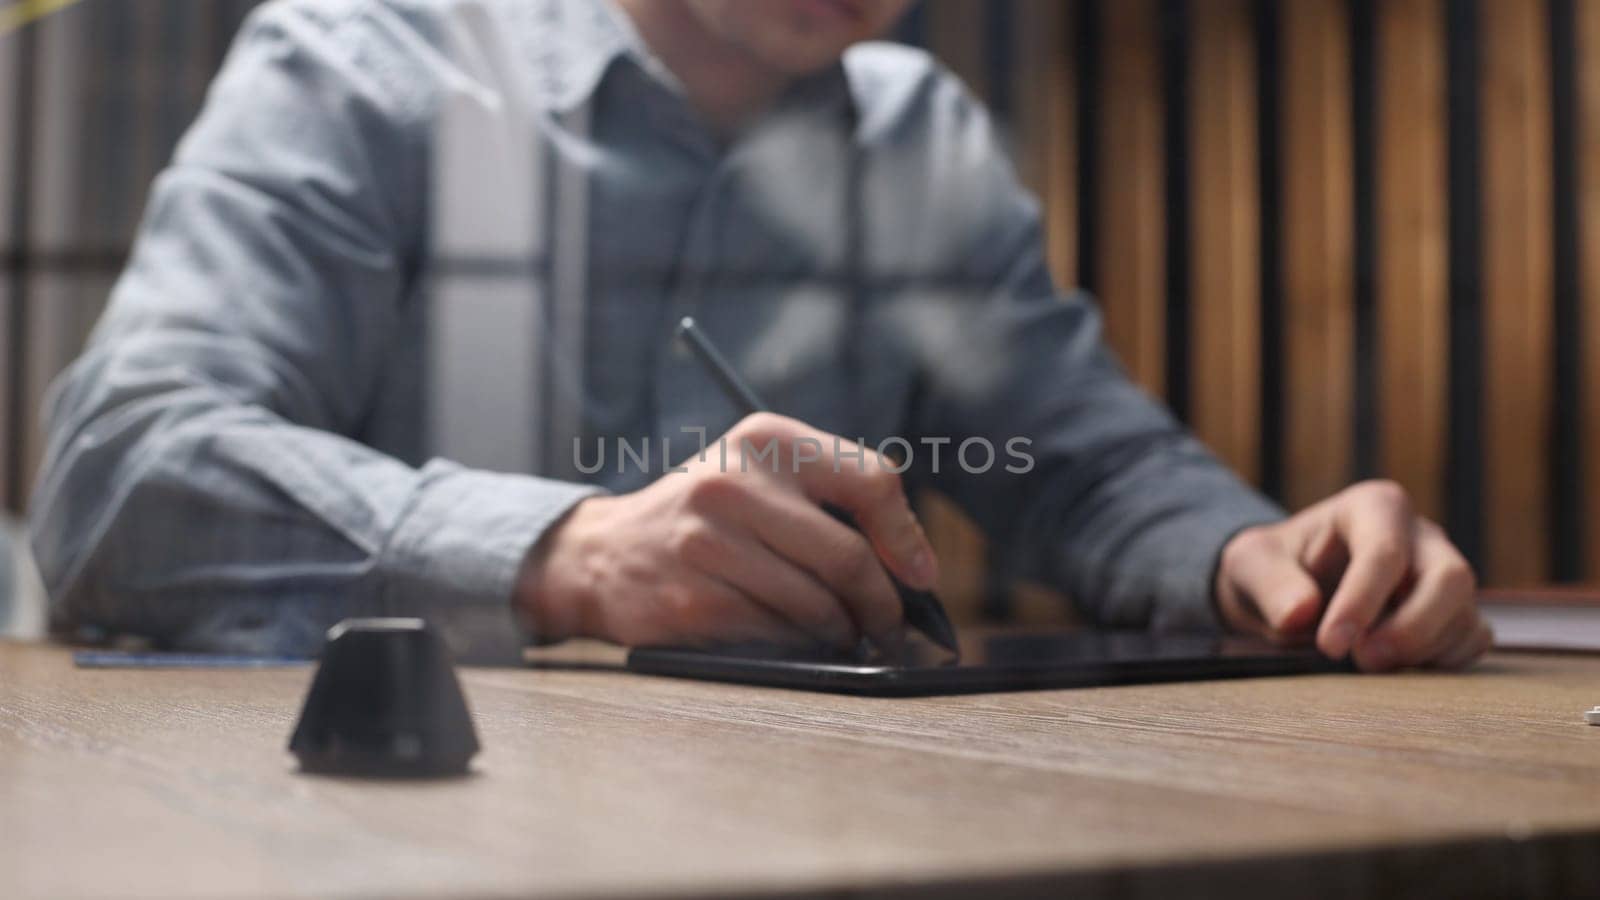 The artist uses a graphic tablet for an art concept.